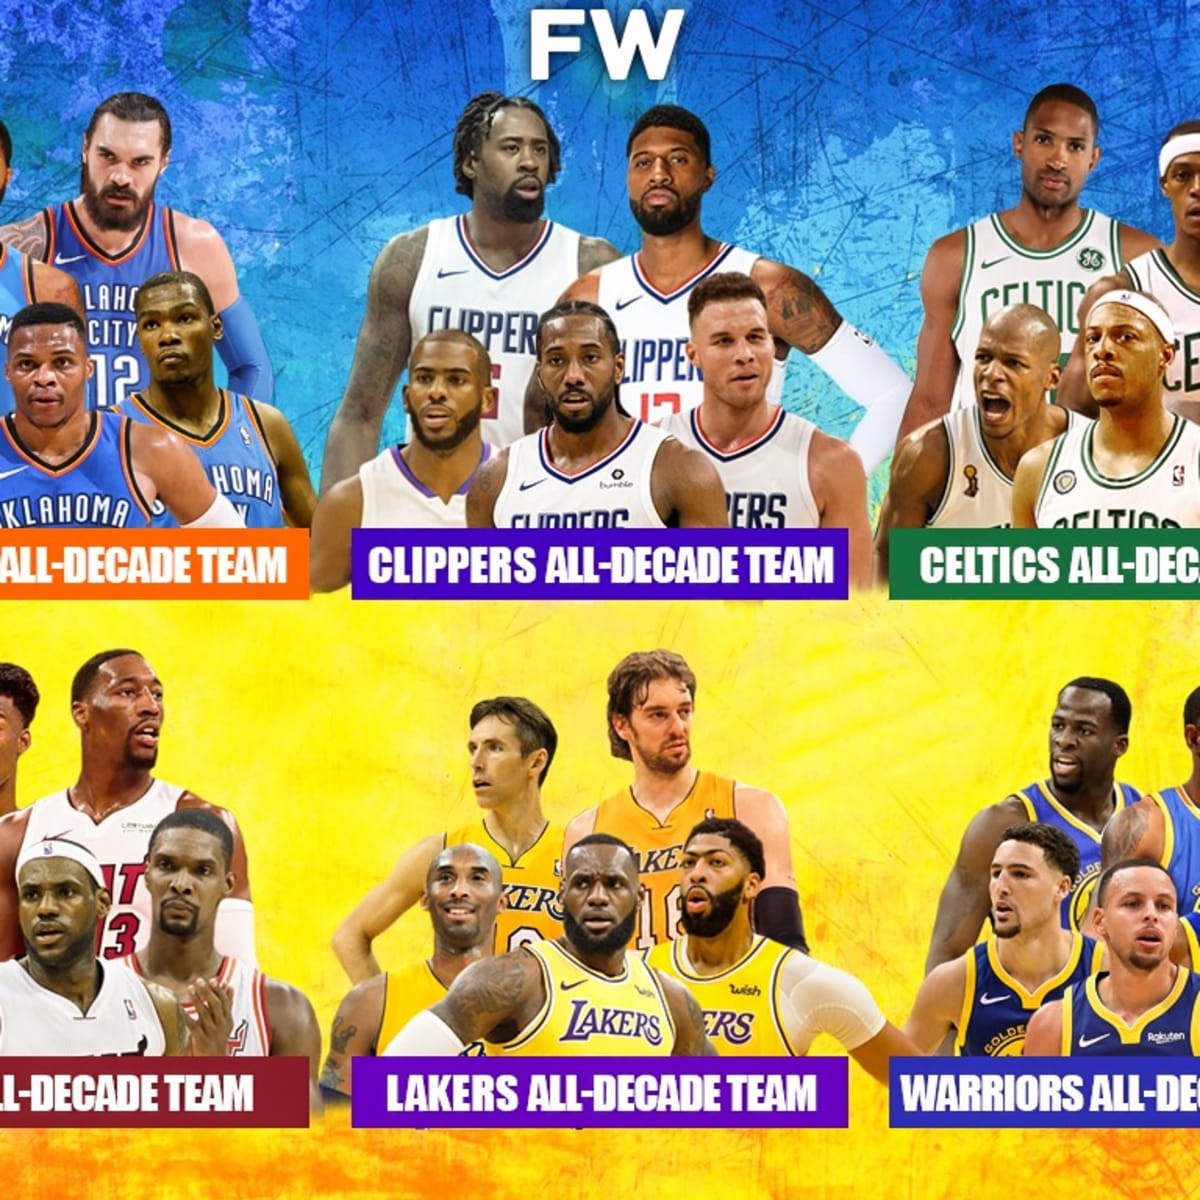 Top 10 Most Popular NBA Teams & Players ranked by Social Influence